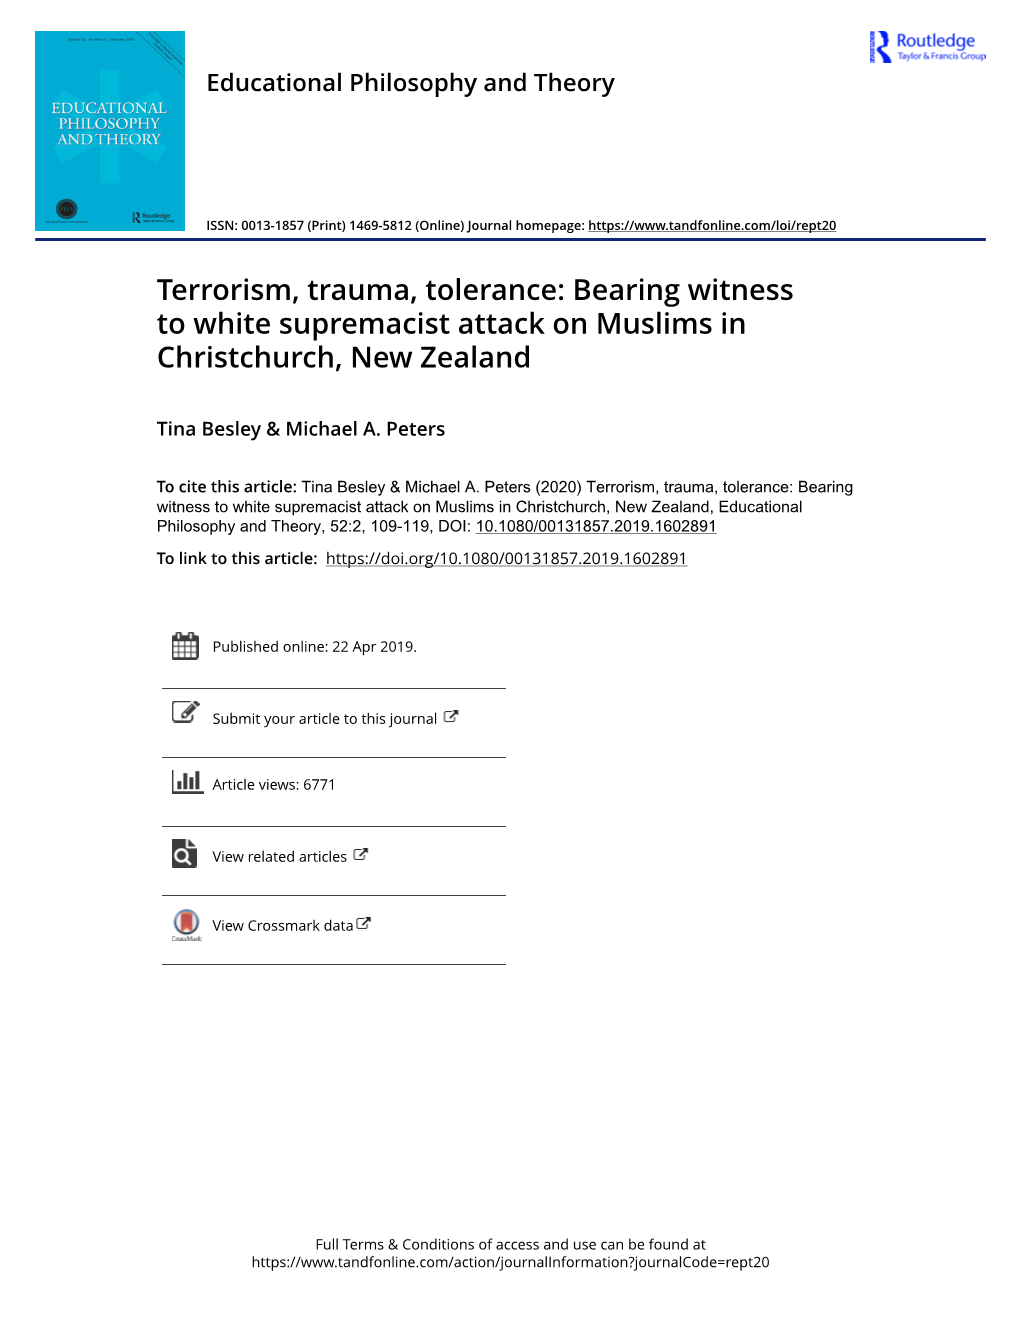 Terrorism, Trauma, Tolerance: Bearing Witness to White Supremacist Attack on Muslims in Christchurch, New Zealand